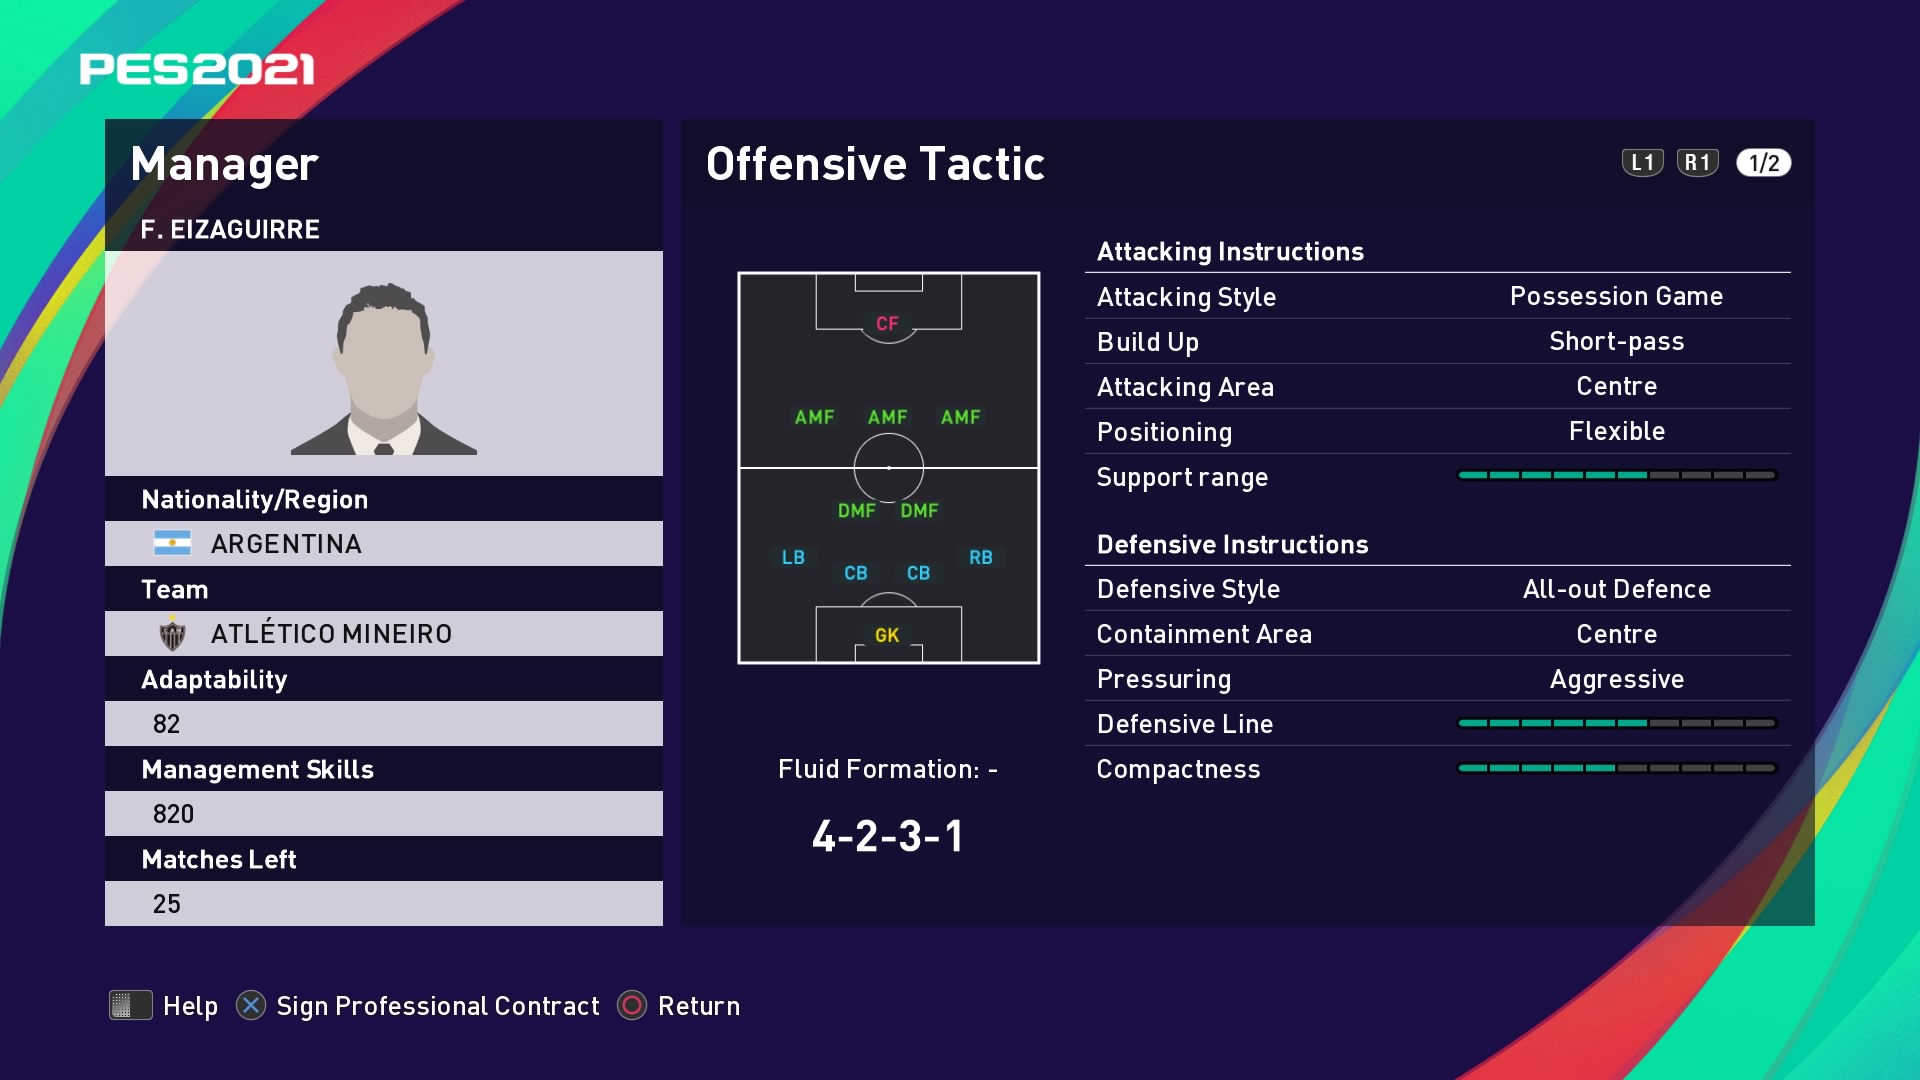 F. Eizaguirre (2) (Jorge Sampaoli) Offensive Tactic in PES 2021 myClub